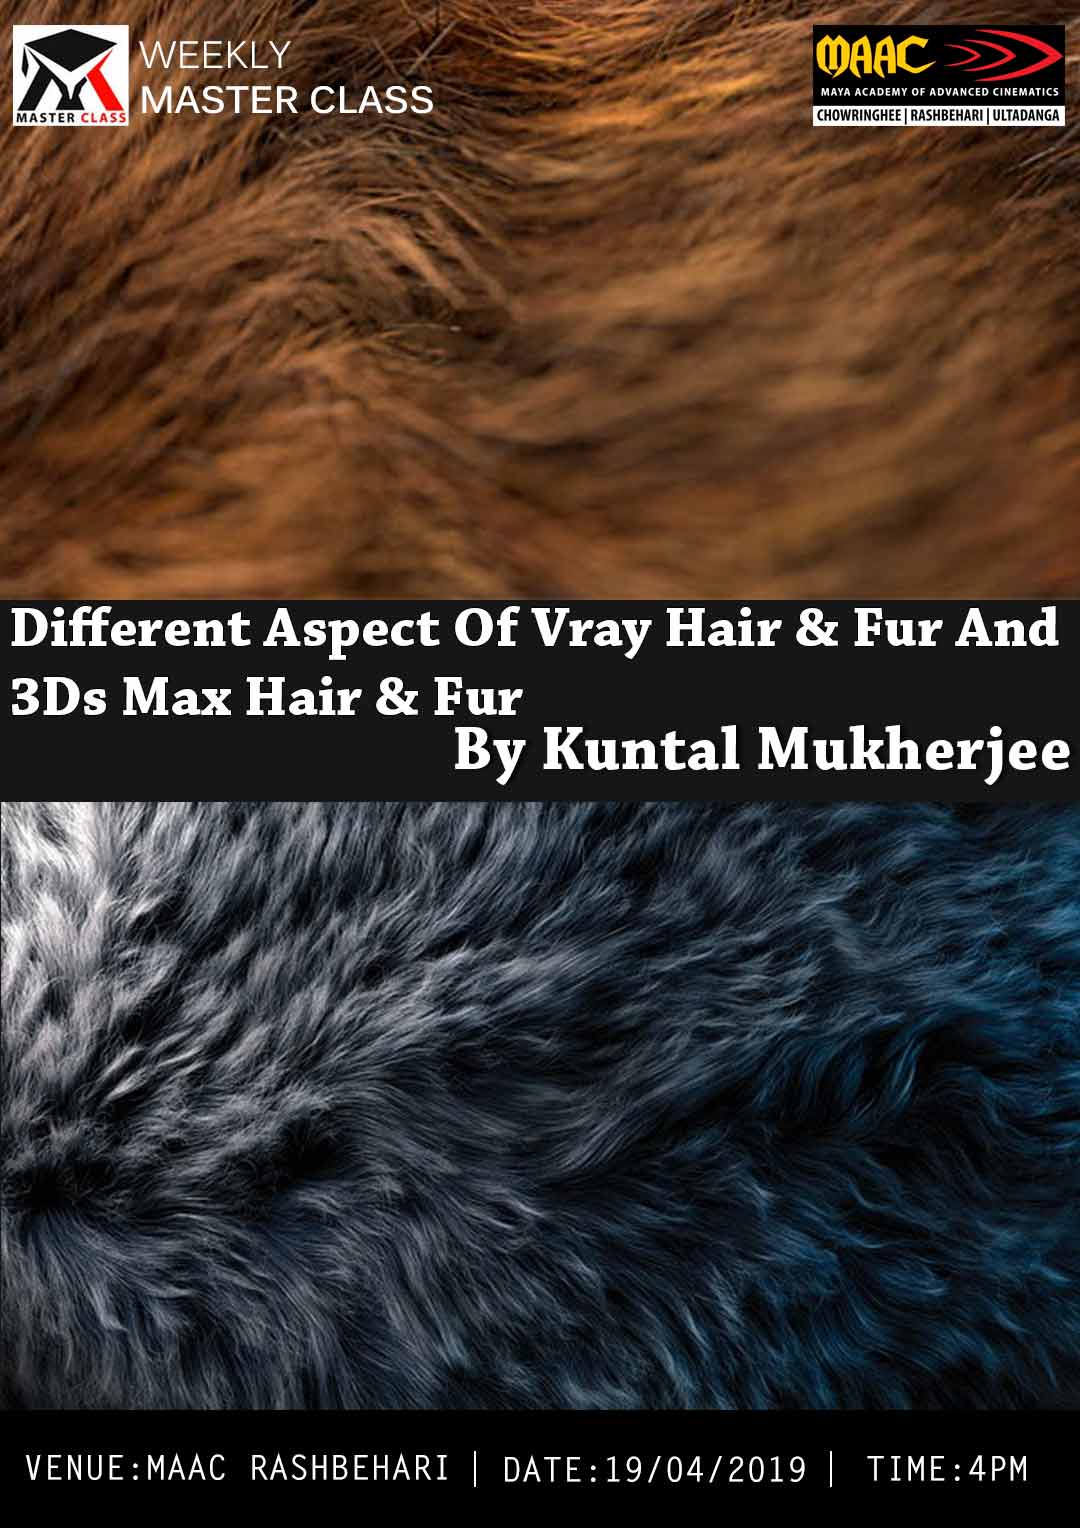 Weekly Master Class on Different Aspect Of VRay Hair & Fur and 3Ds Max Hair & Fur